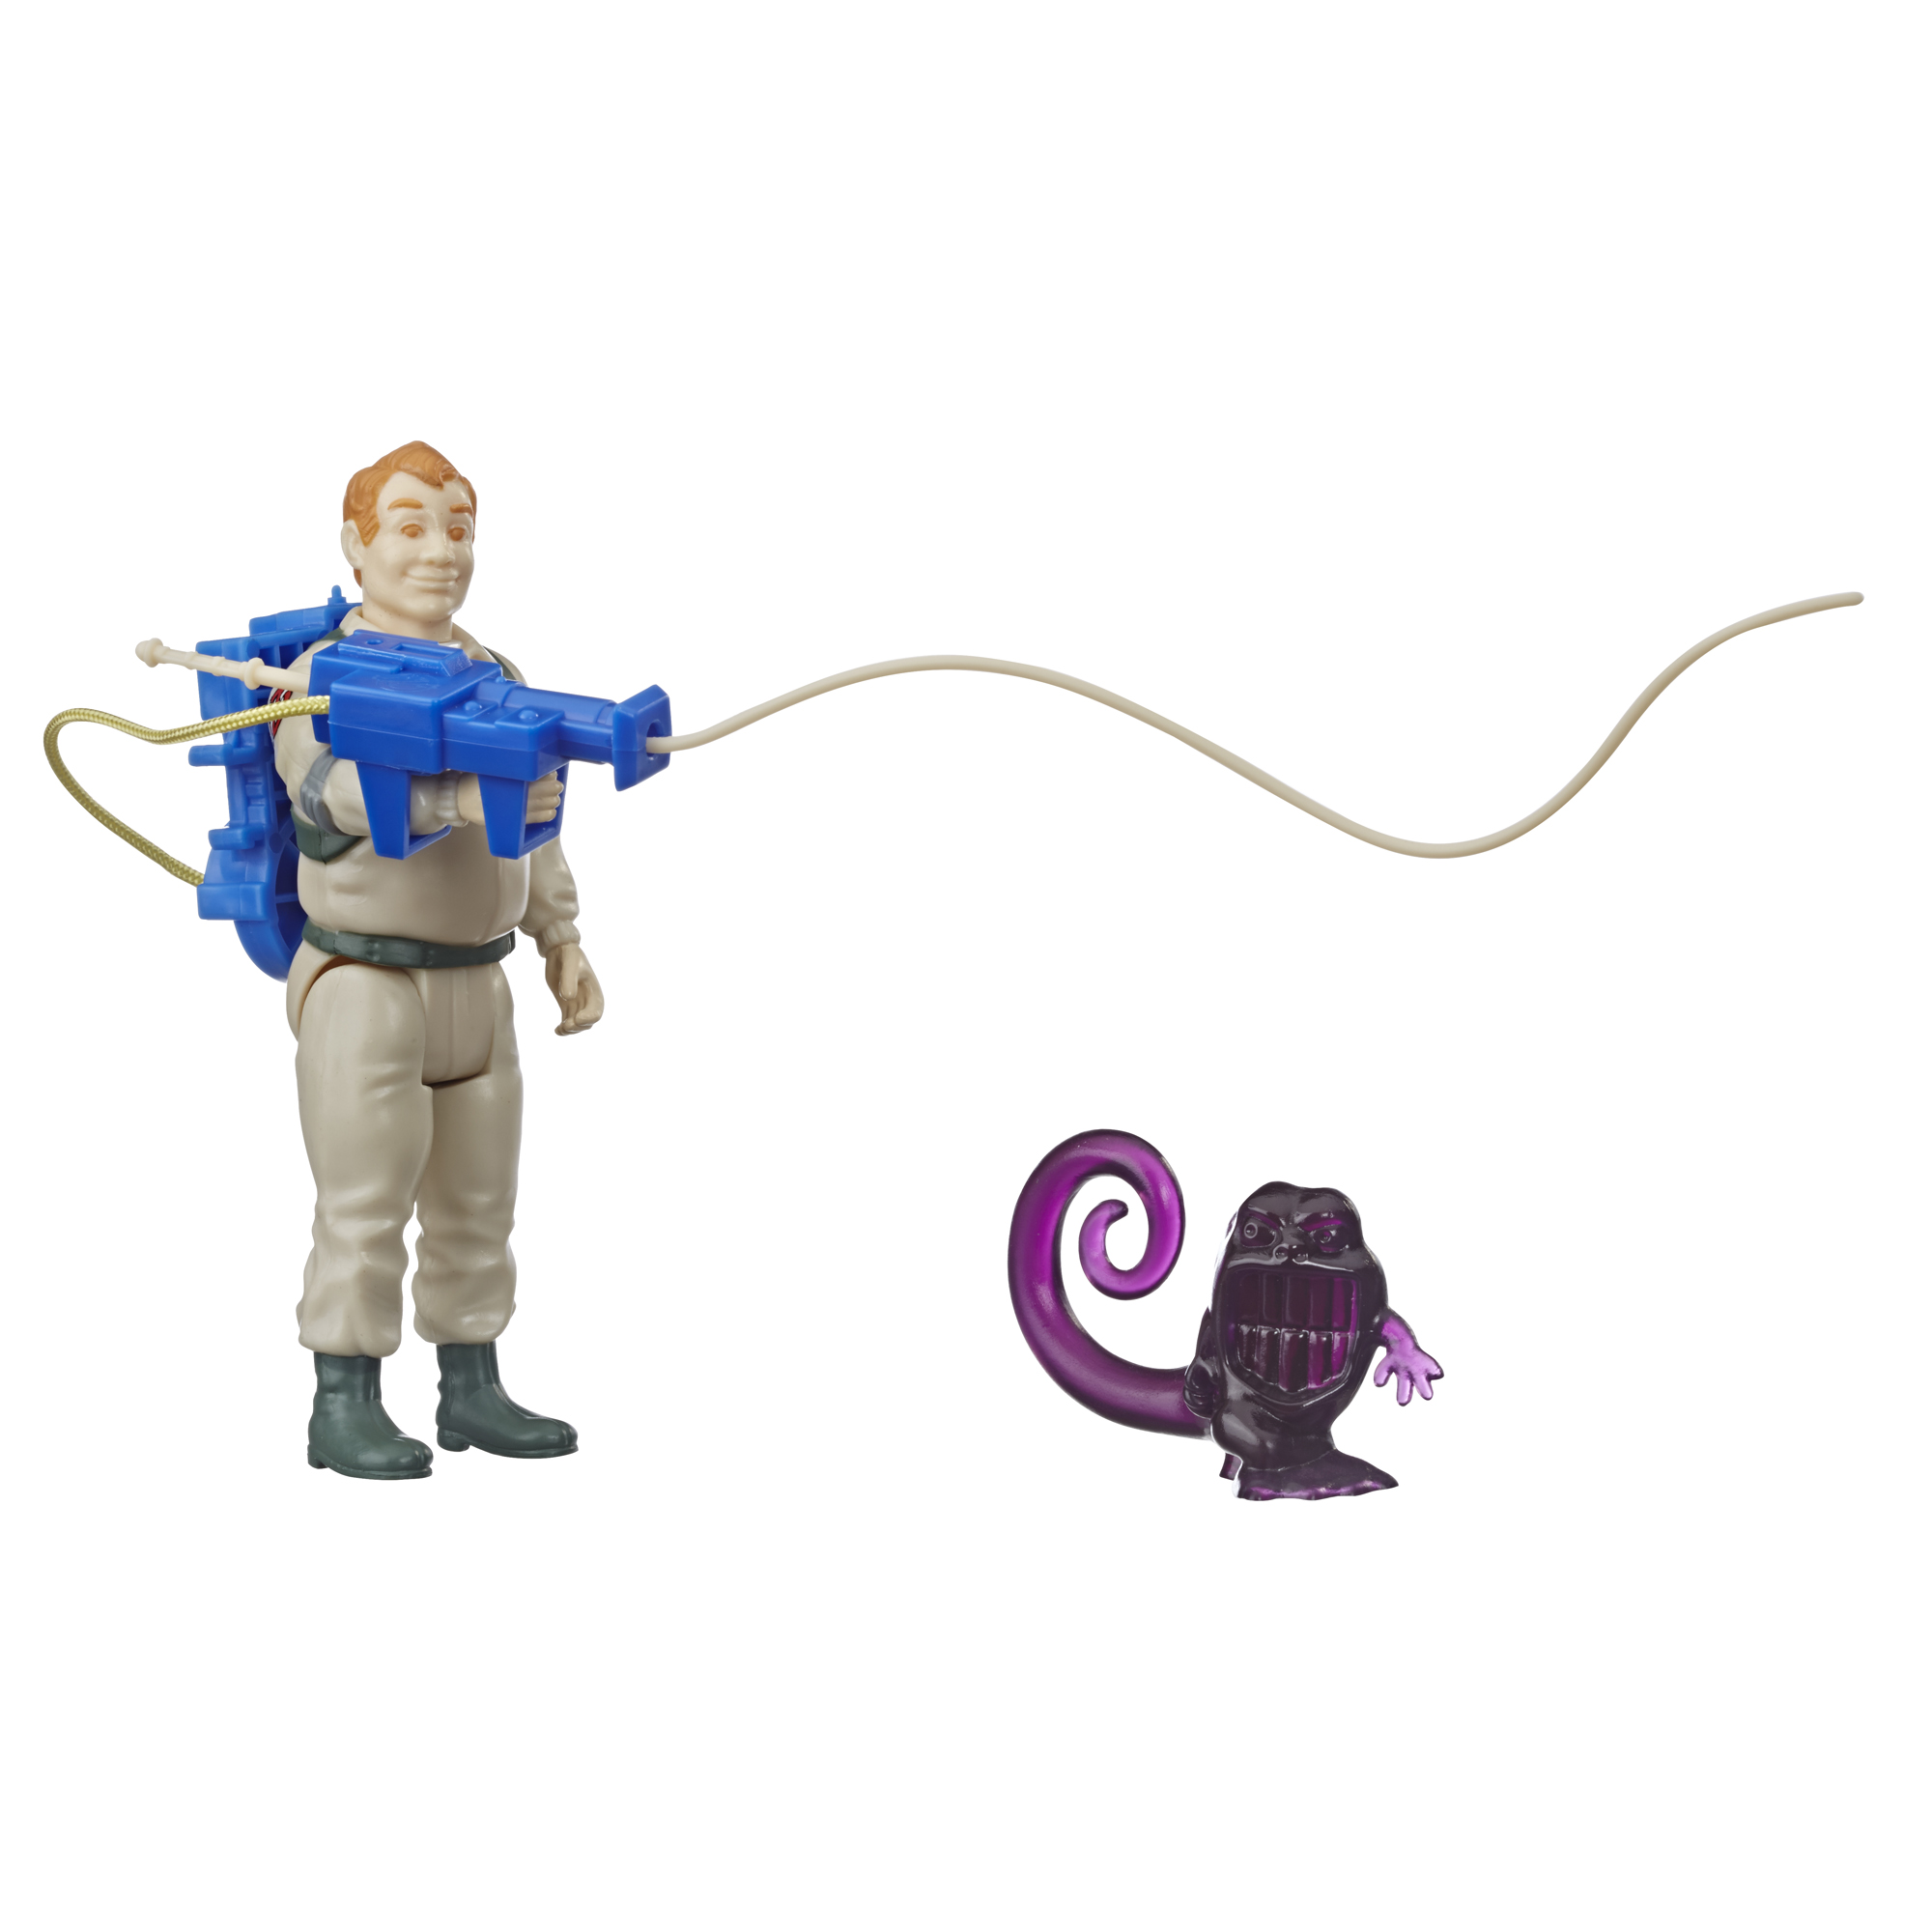 Ghostbusters Kenner Classics Ray Stantz and Wrapper Ghost Action Figure - image 1 of 6